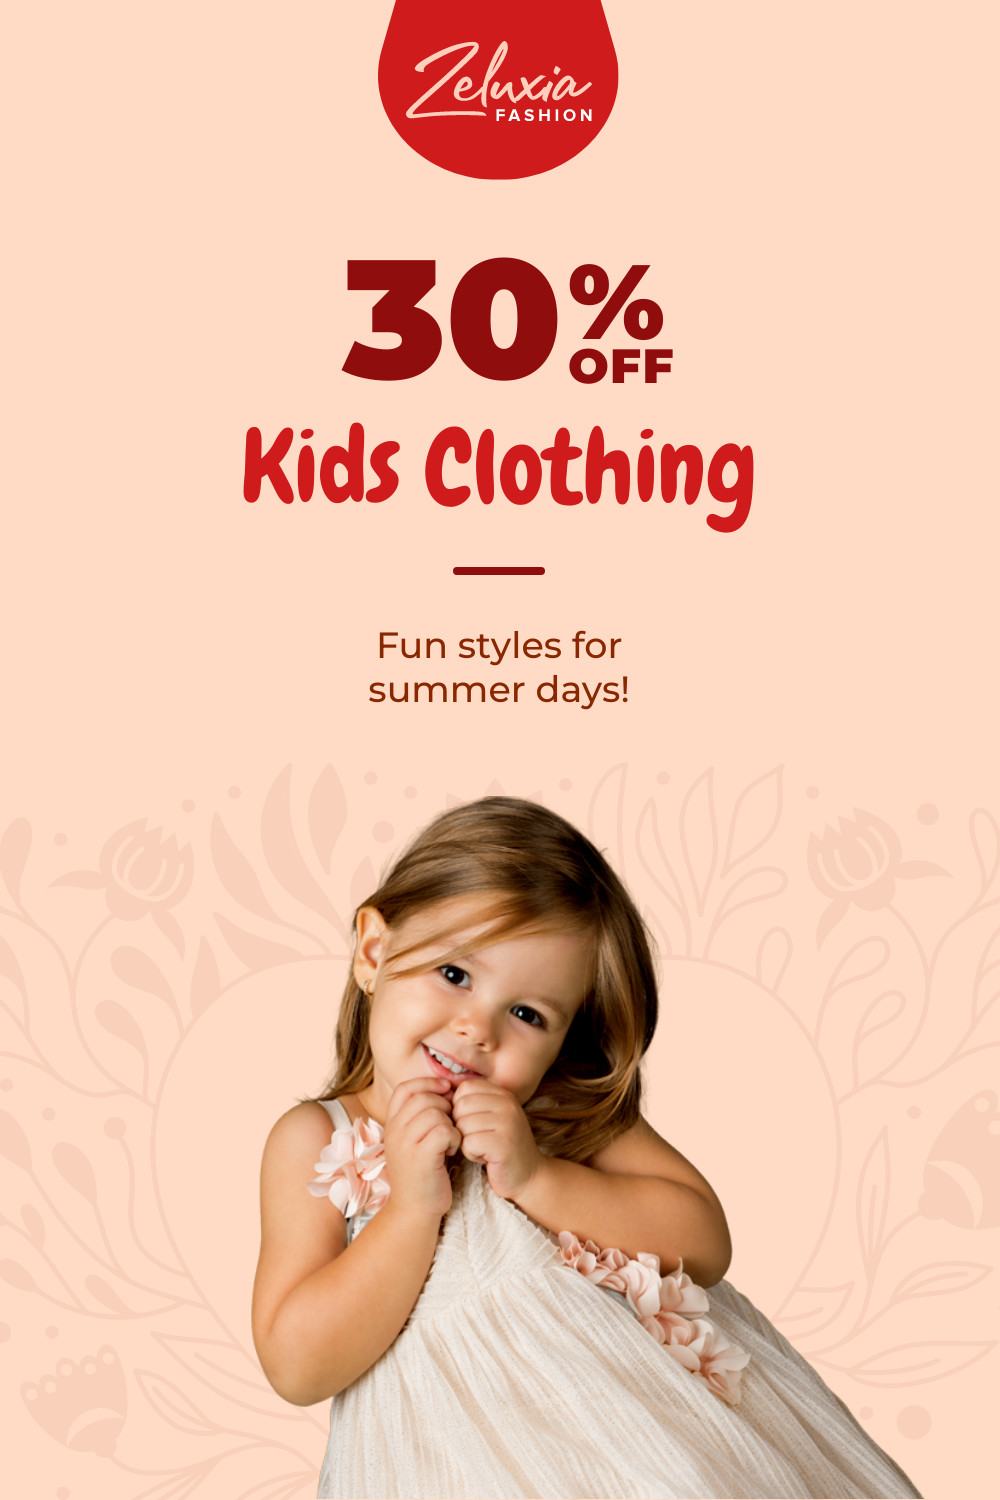 Kids Clothing Summer Days Inline Rectangle 300x250